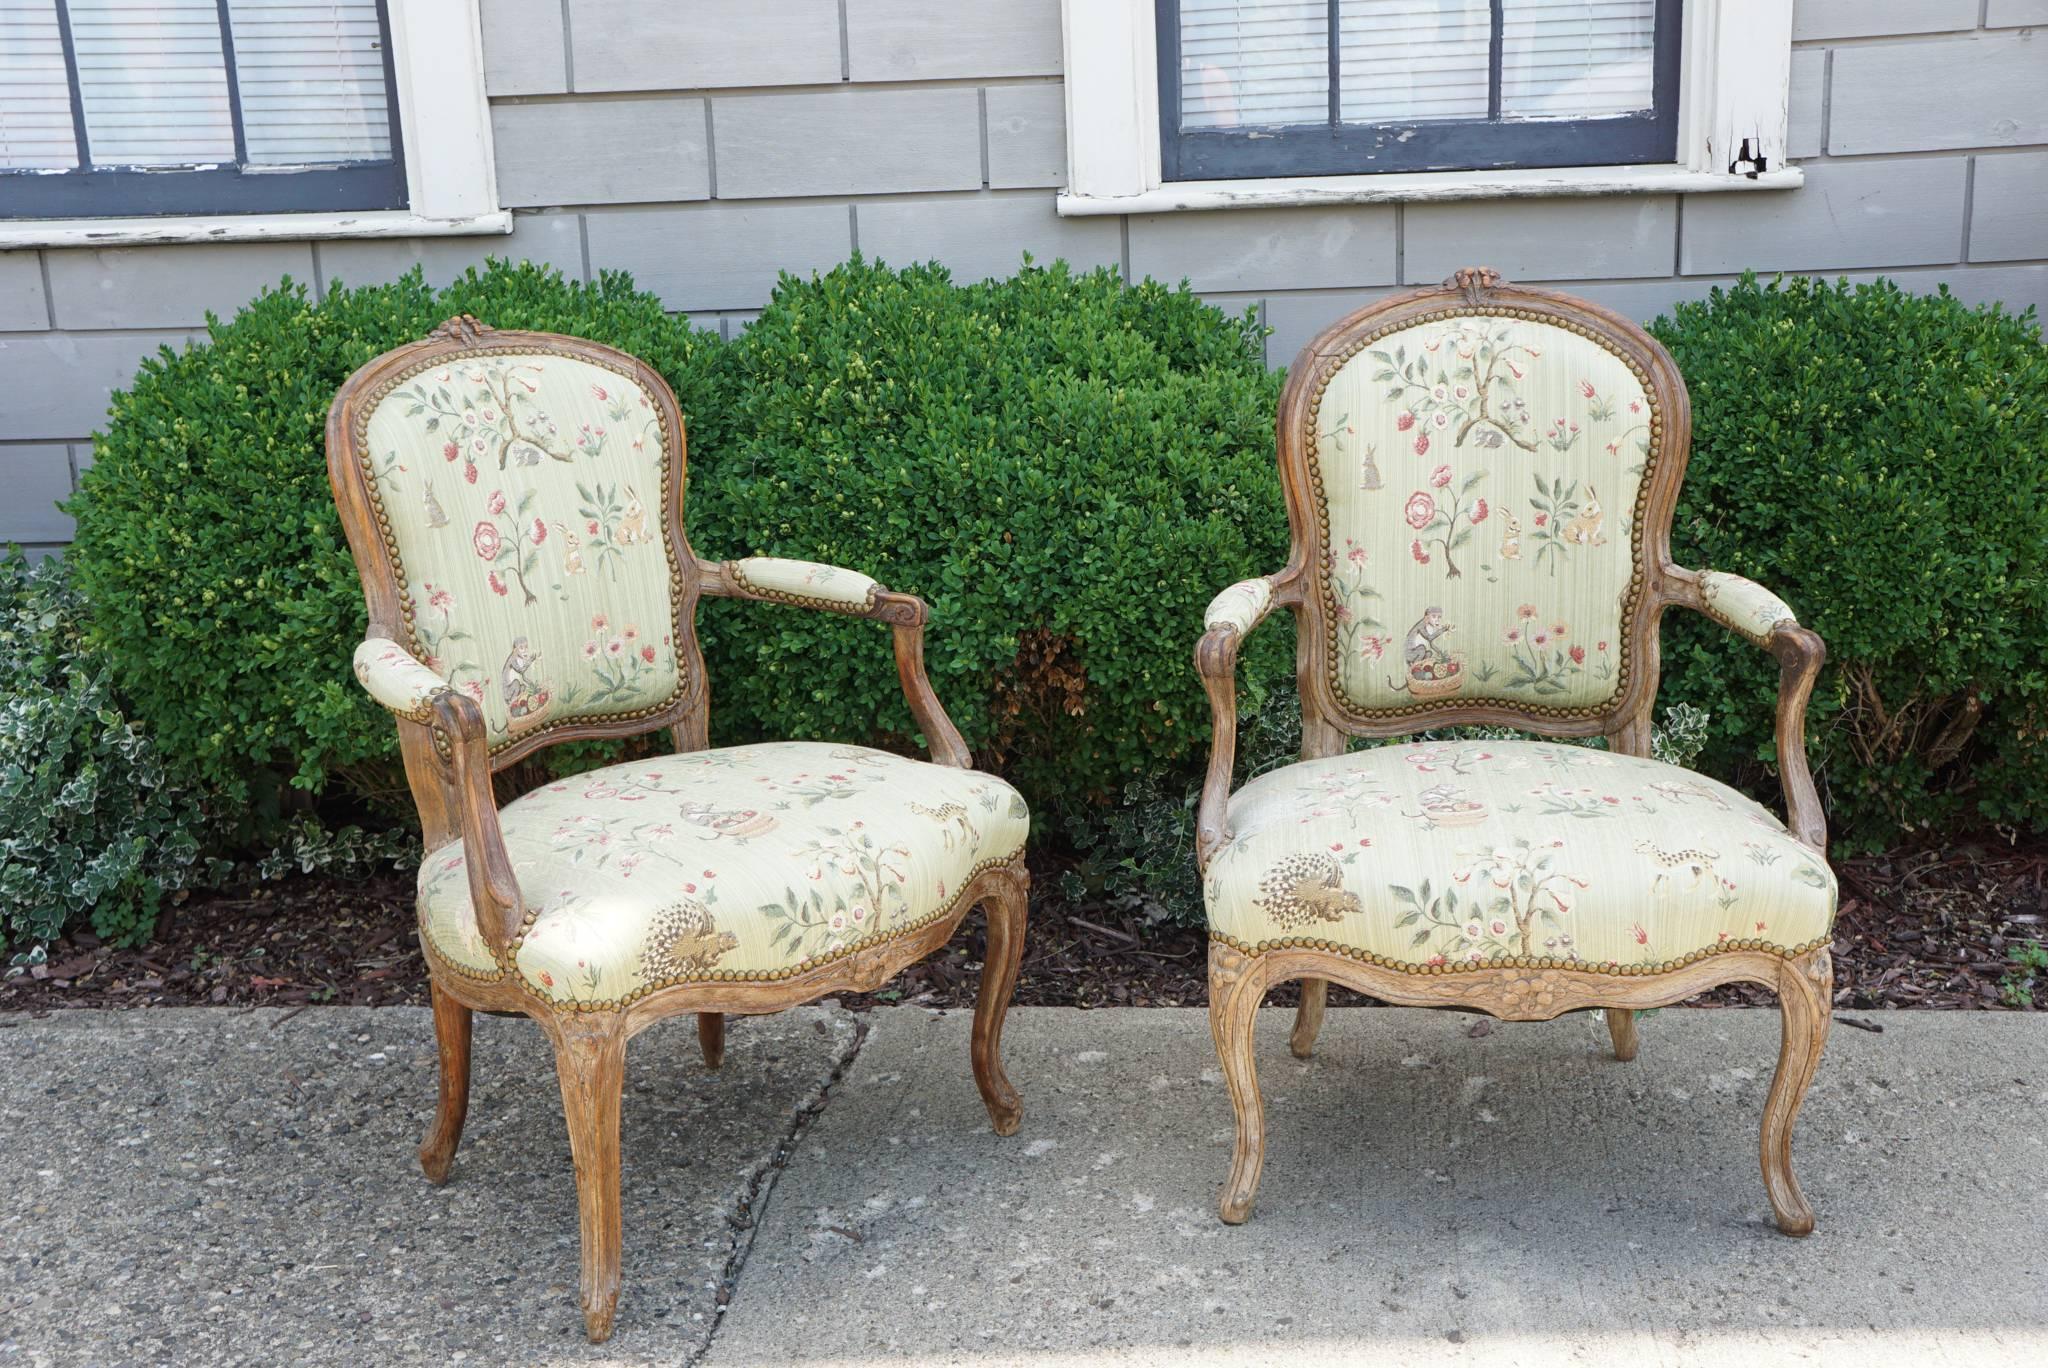 This lovely pair of period chairs circa 1750-1760 were made in France during the reign of Louis XV. Light and fun these small-scale chairs are comfortable and well crafted. The lessening of rigid formality at court demanded many new forms and